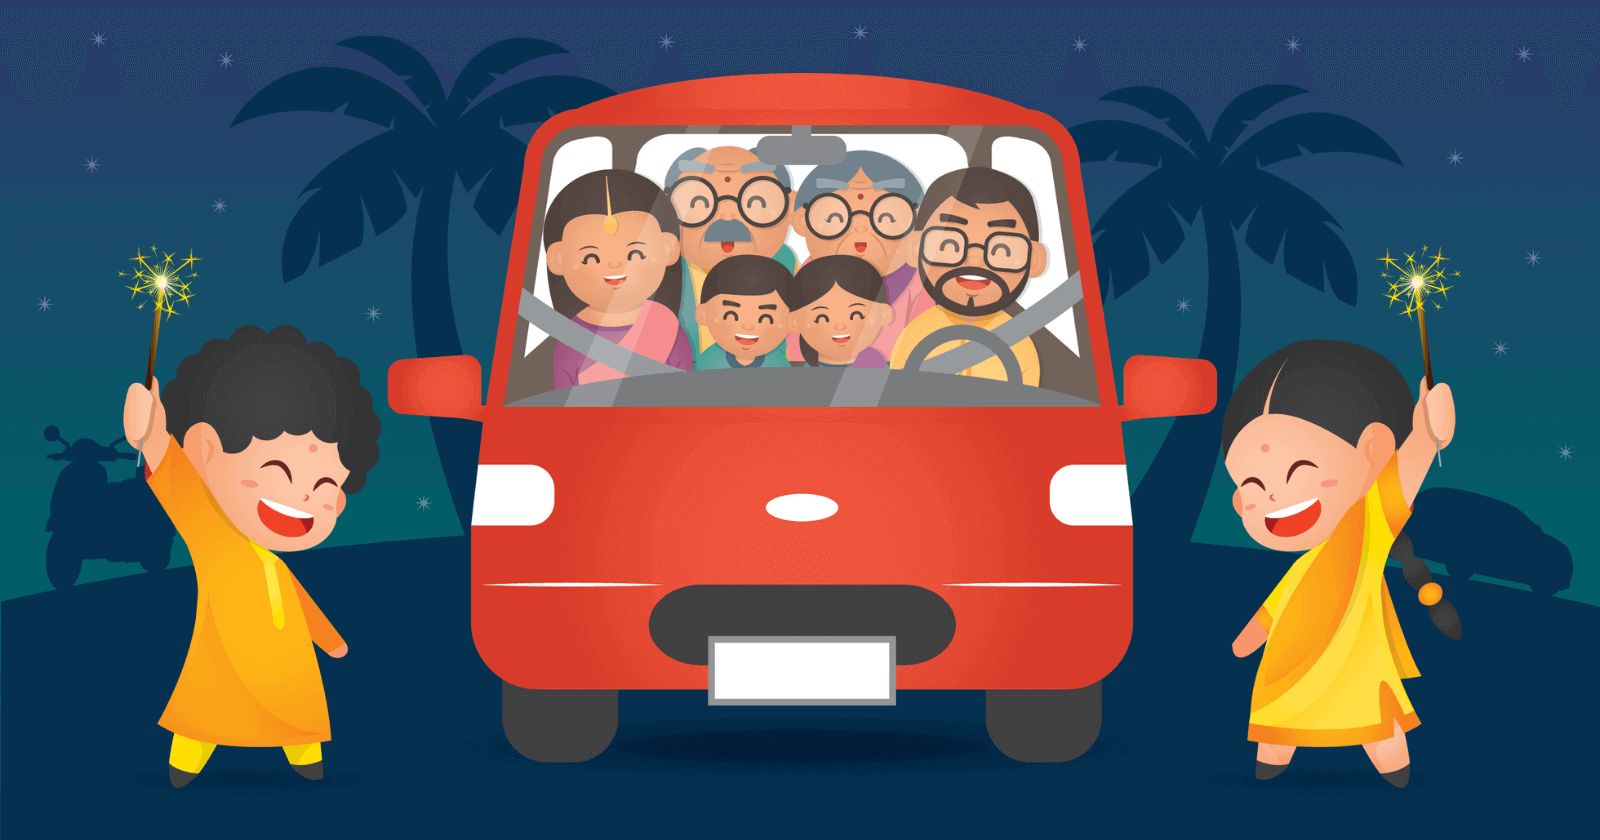 Car Insurance Guide to Light Up Your Diwali